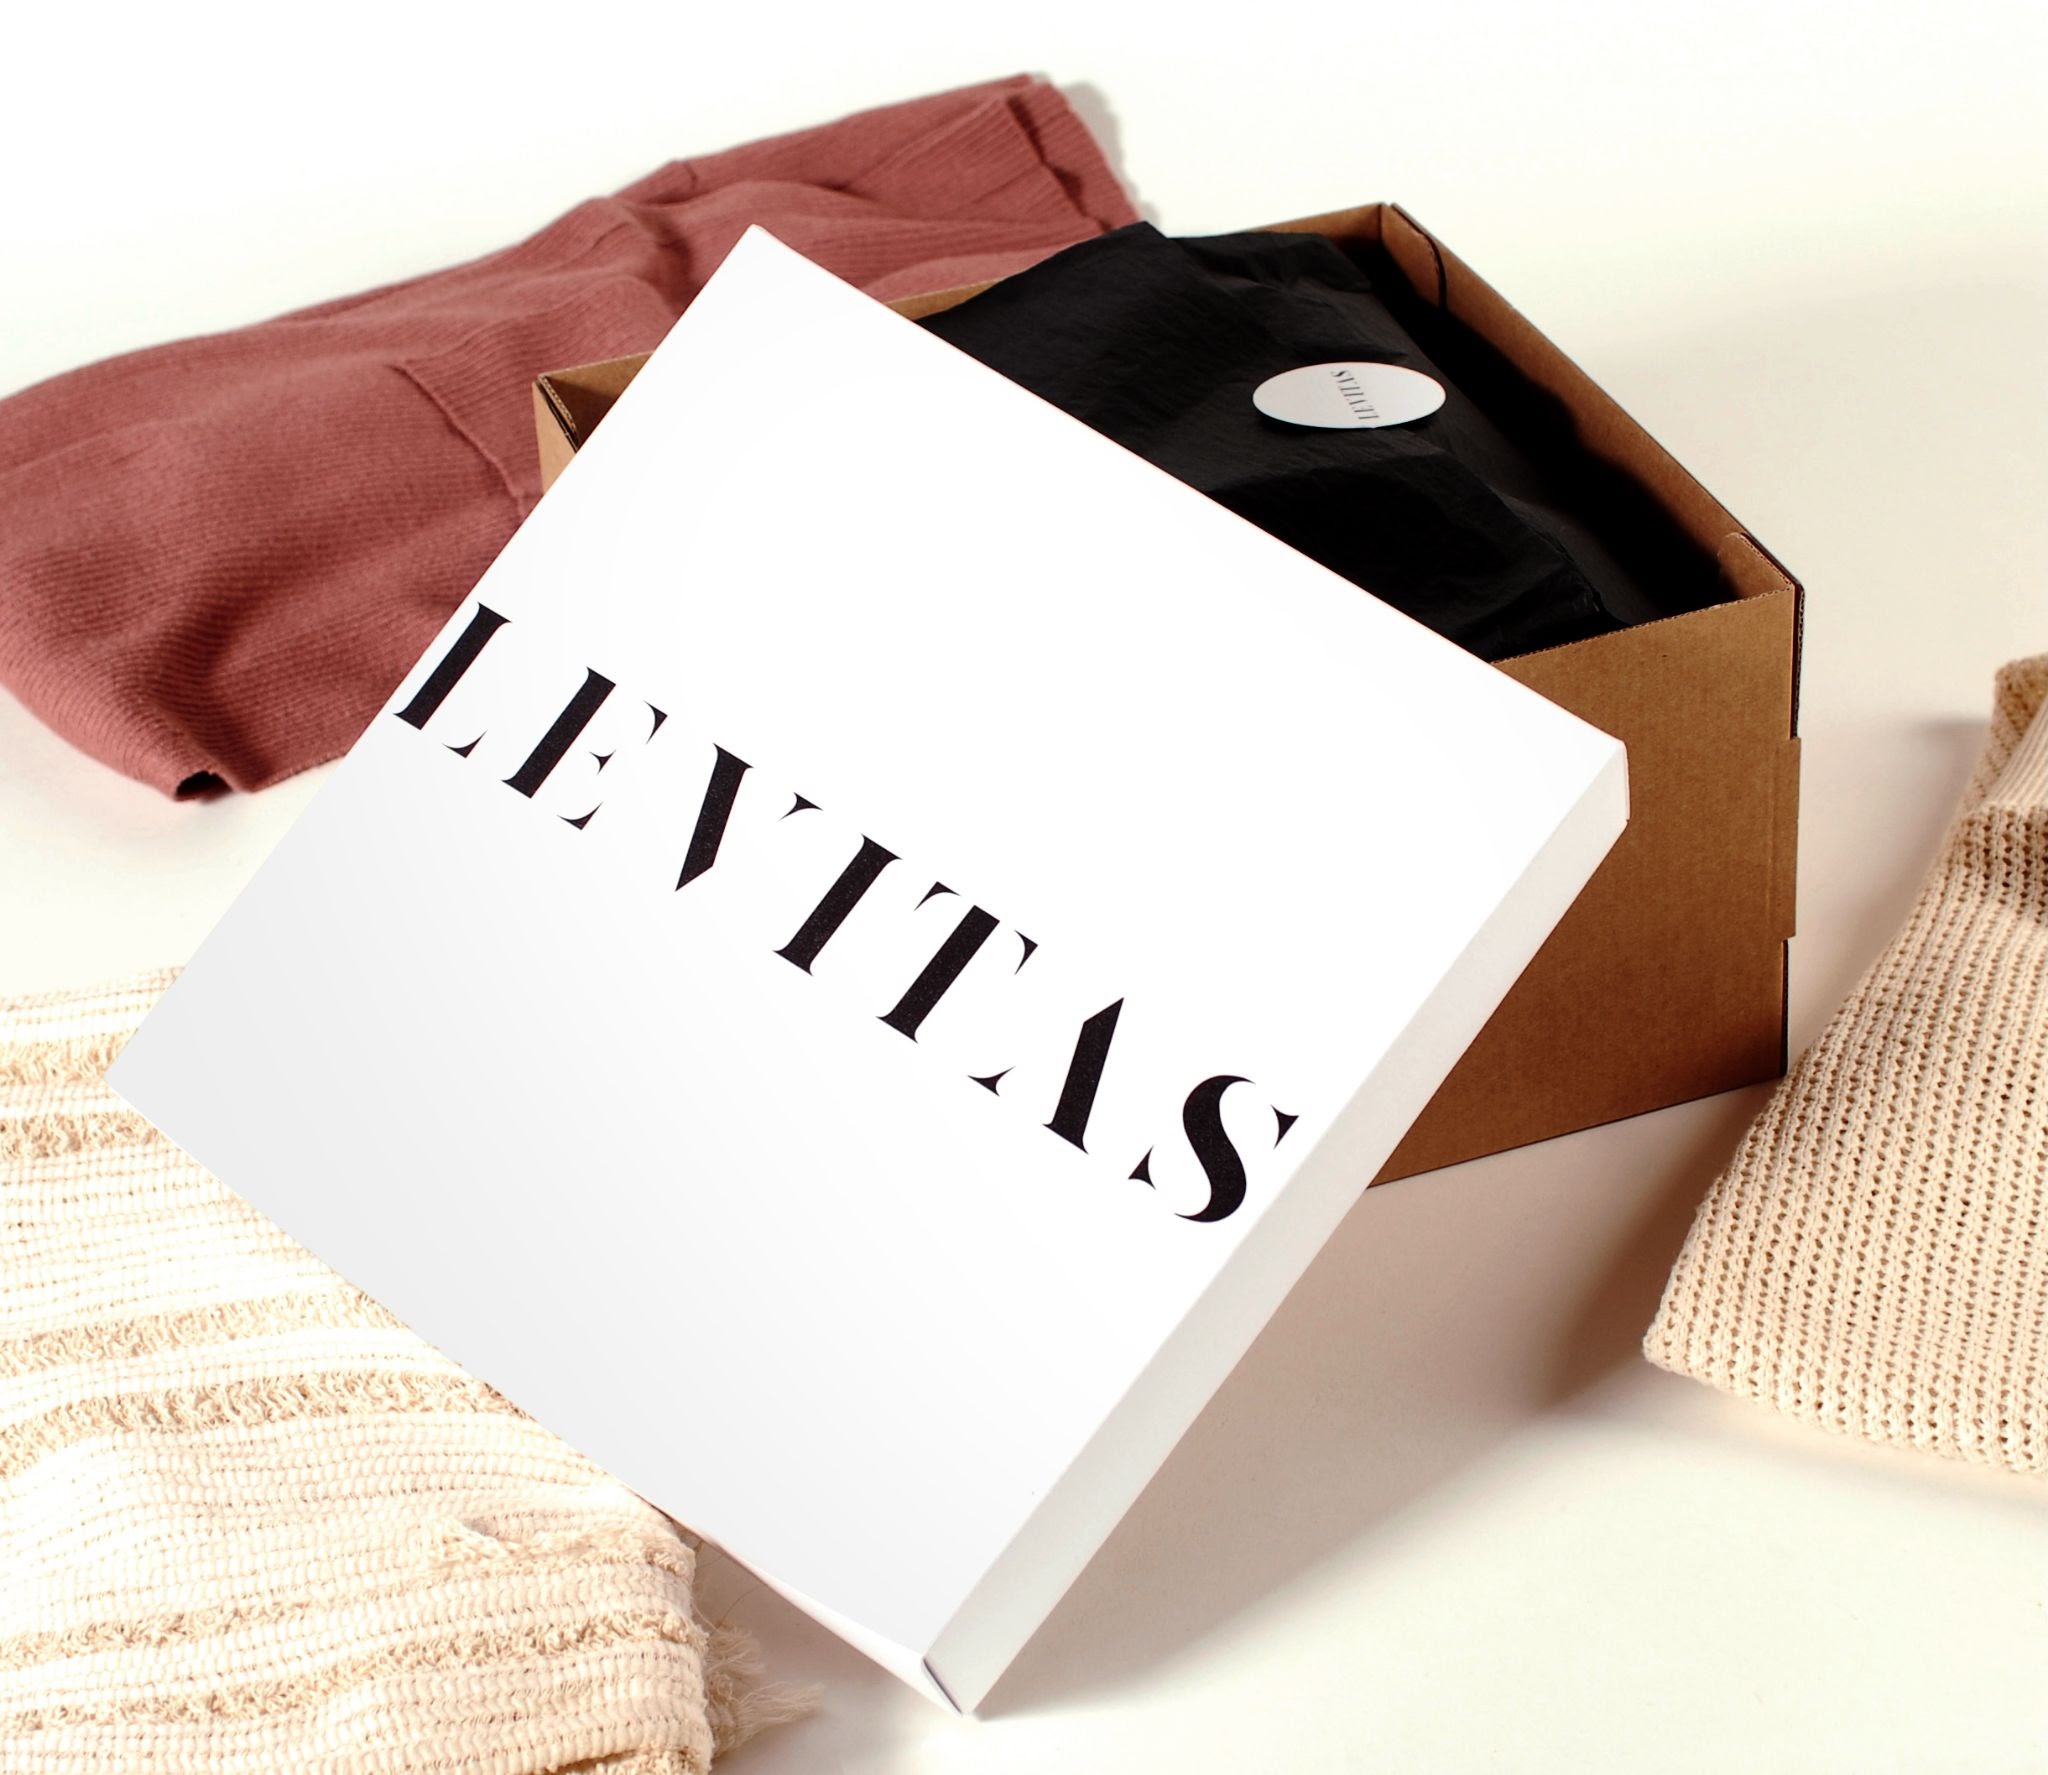 Custom packaging for a clothing brand